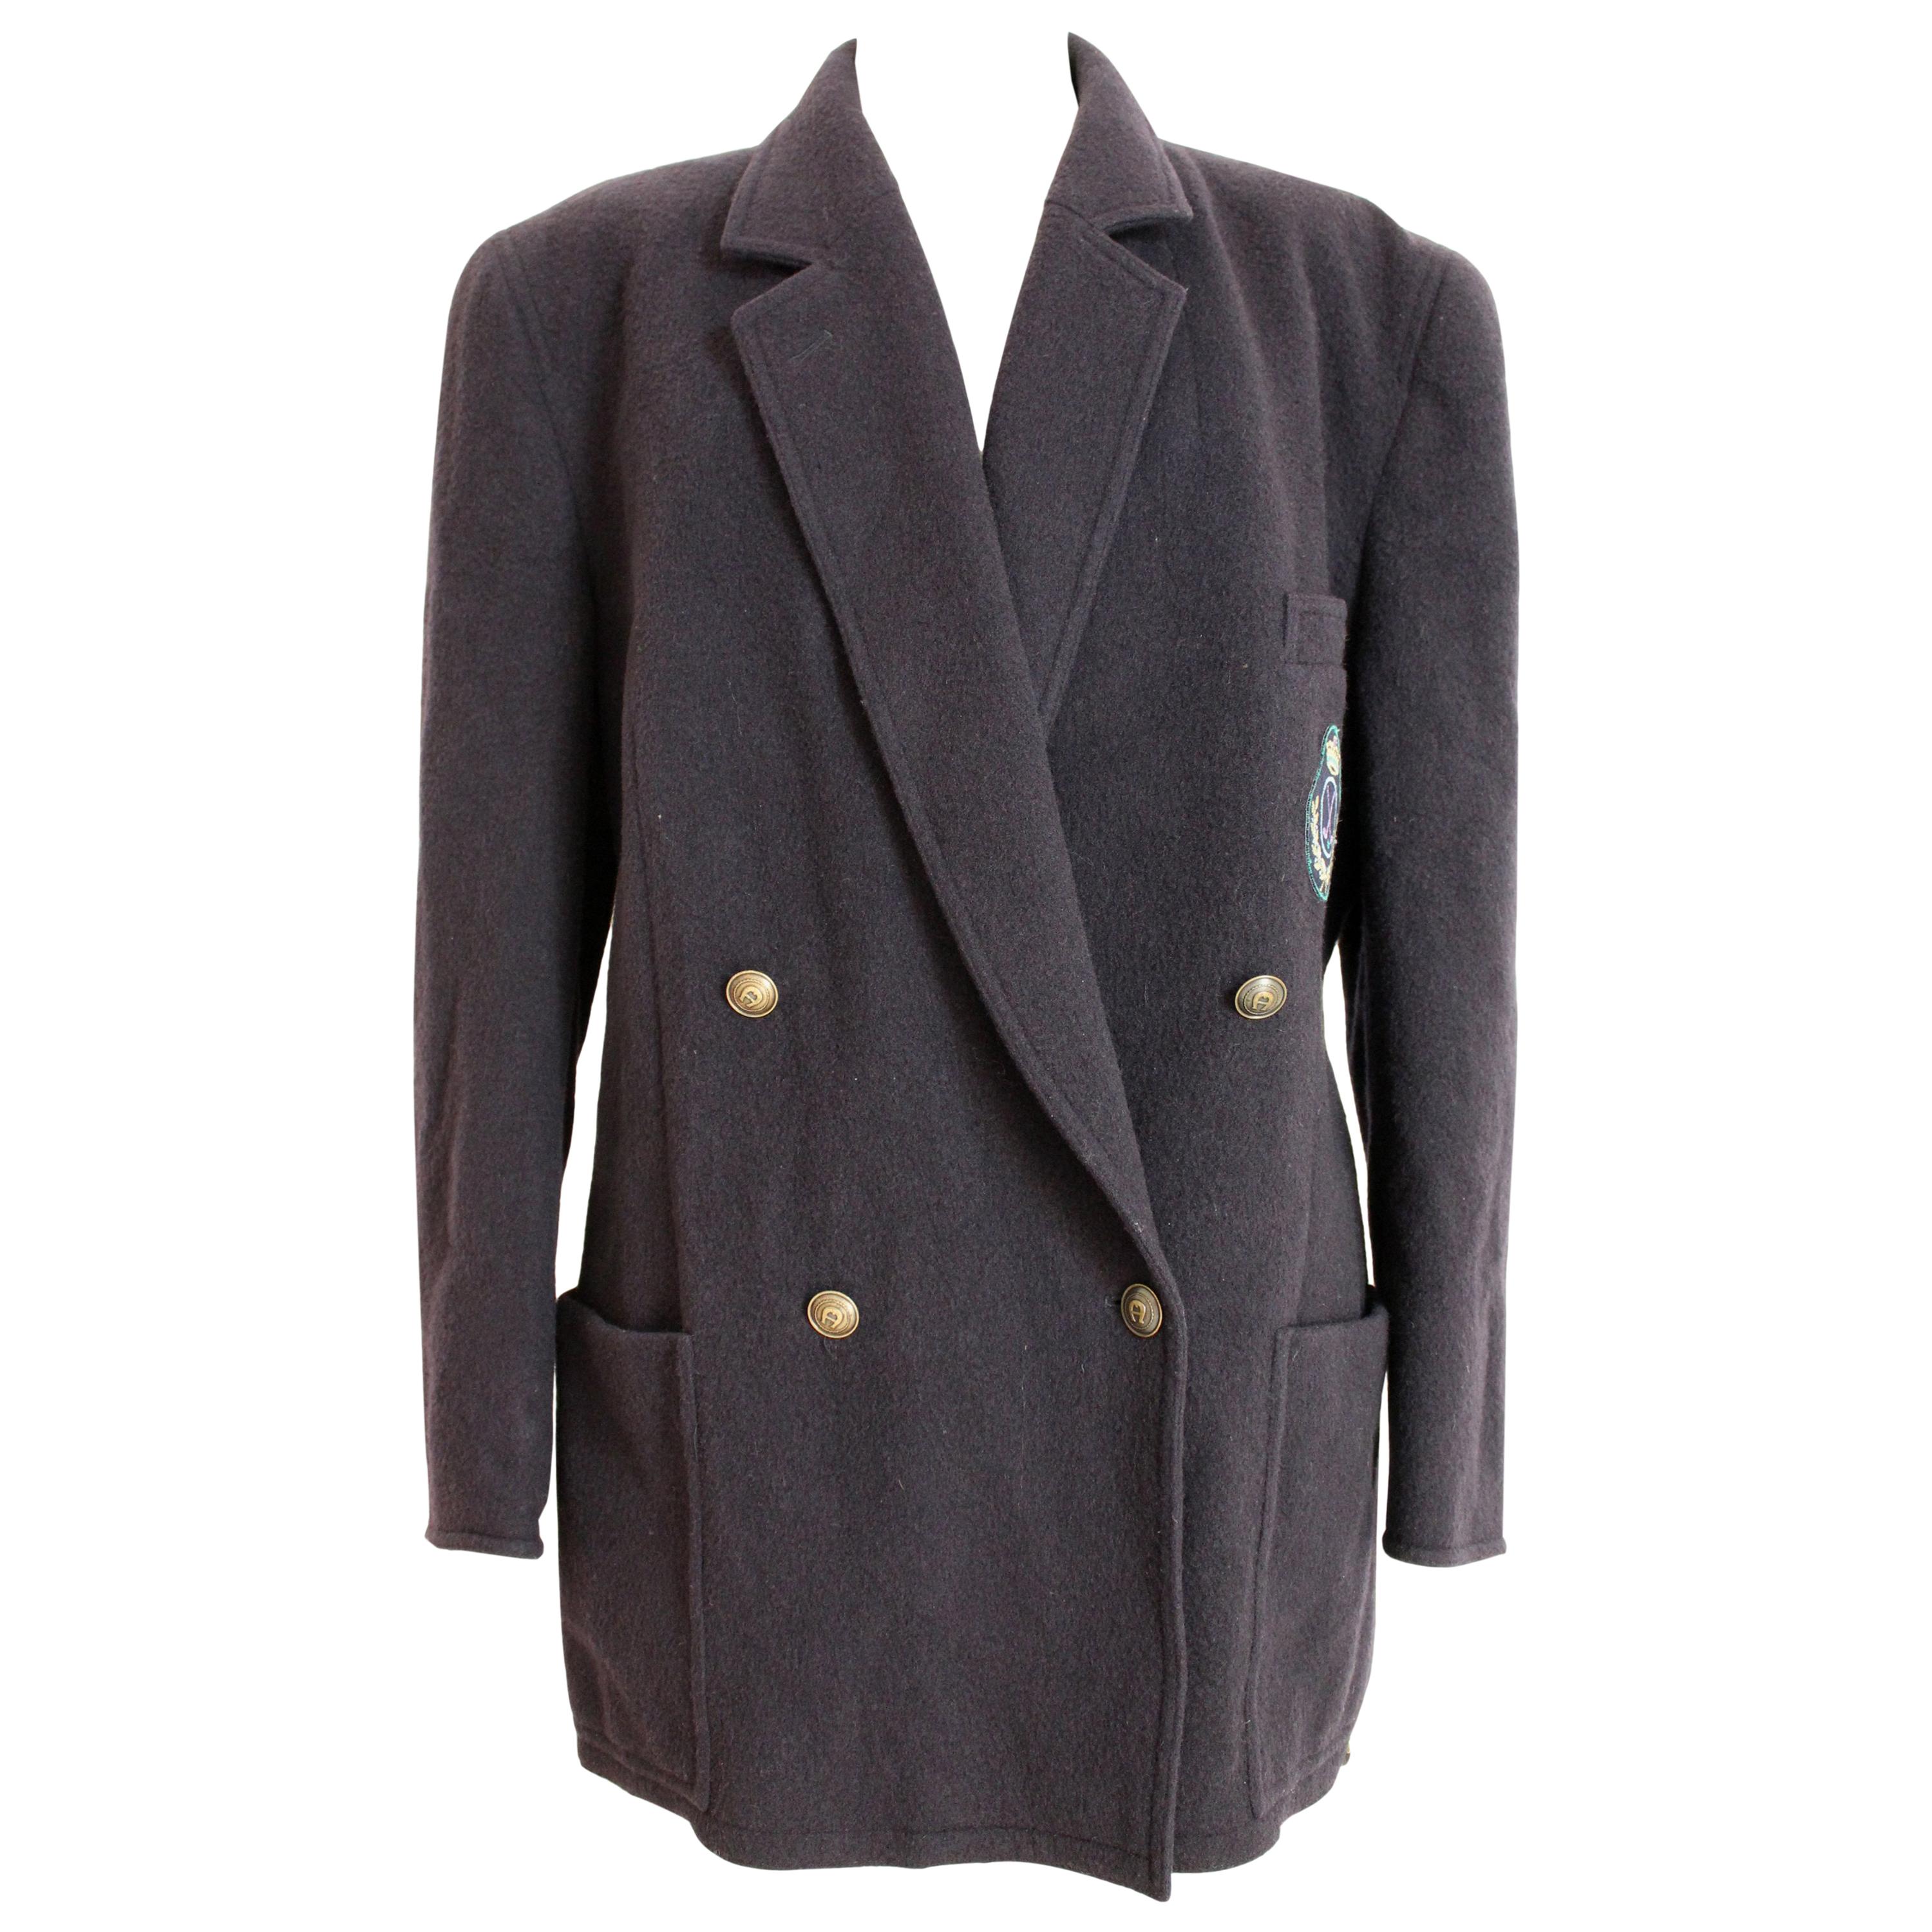 Etienne Aigner Blue Wool Oversize Double Breasted Jacket 1980s